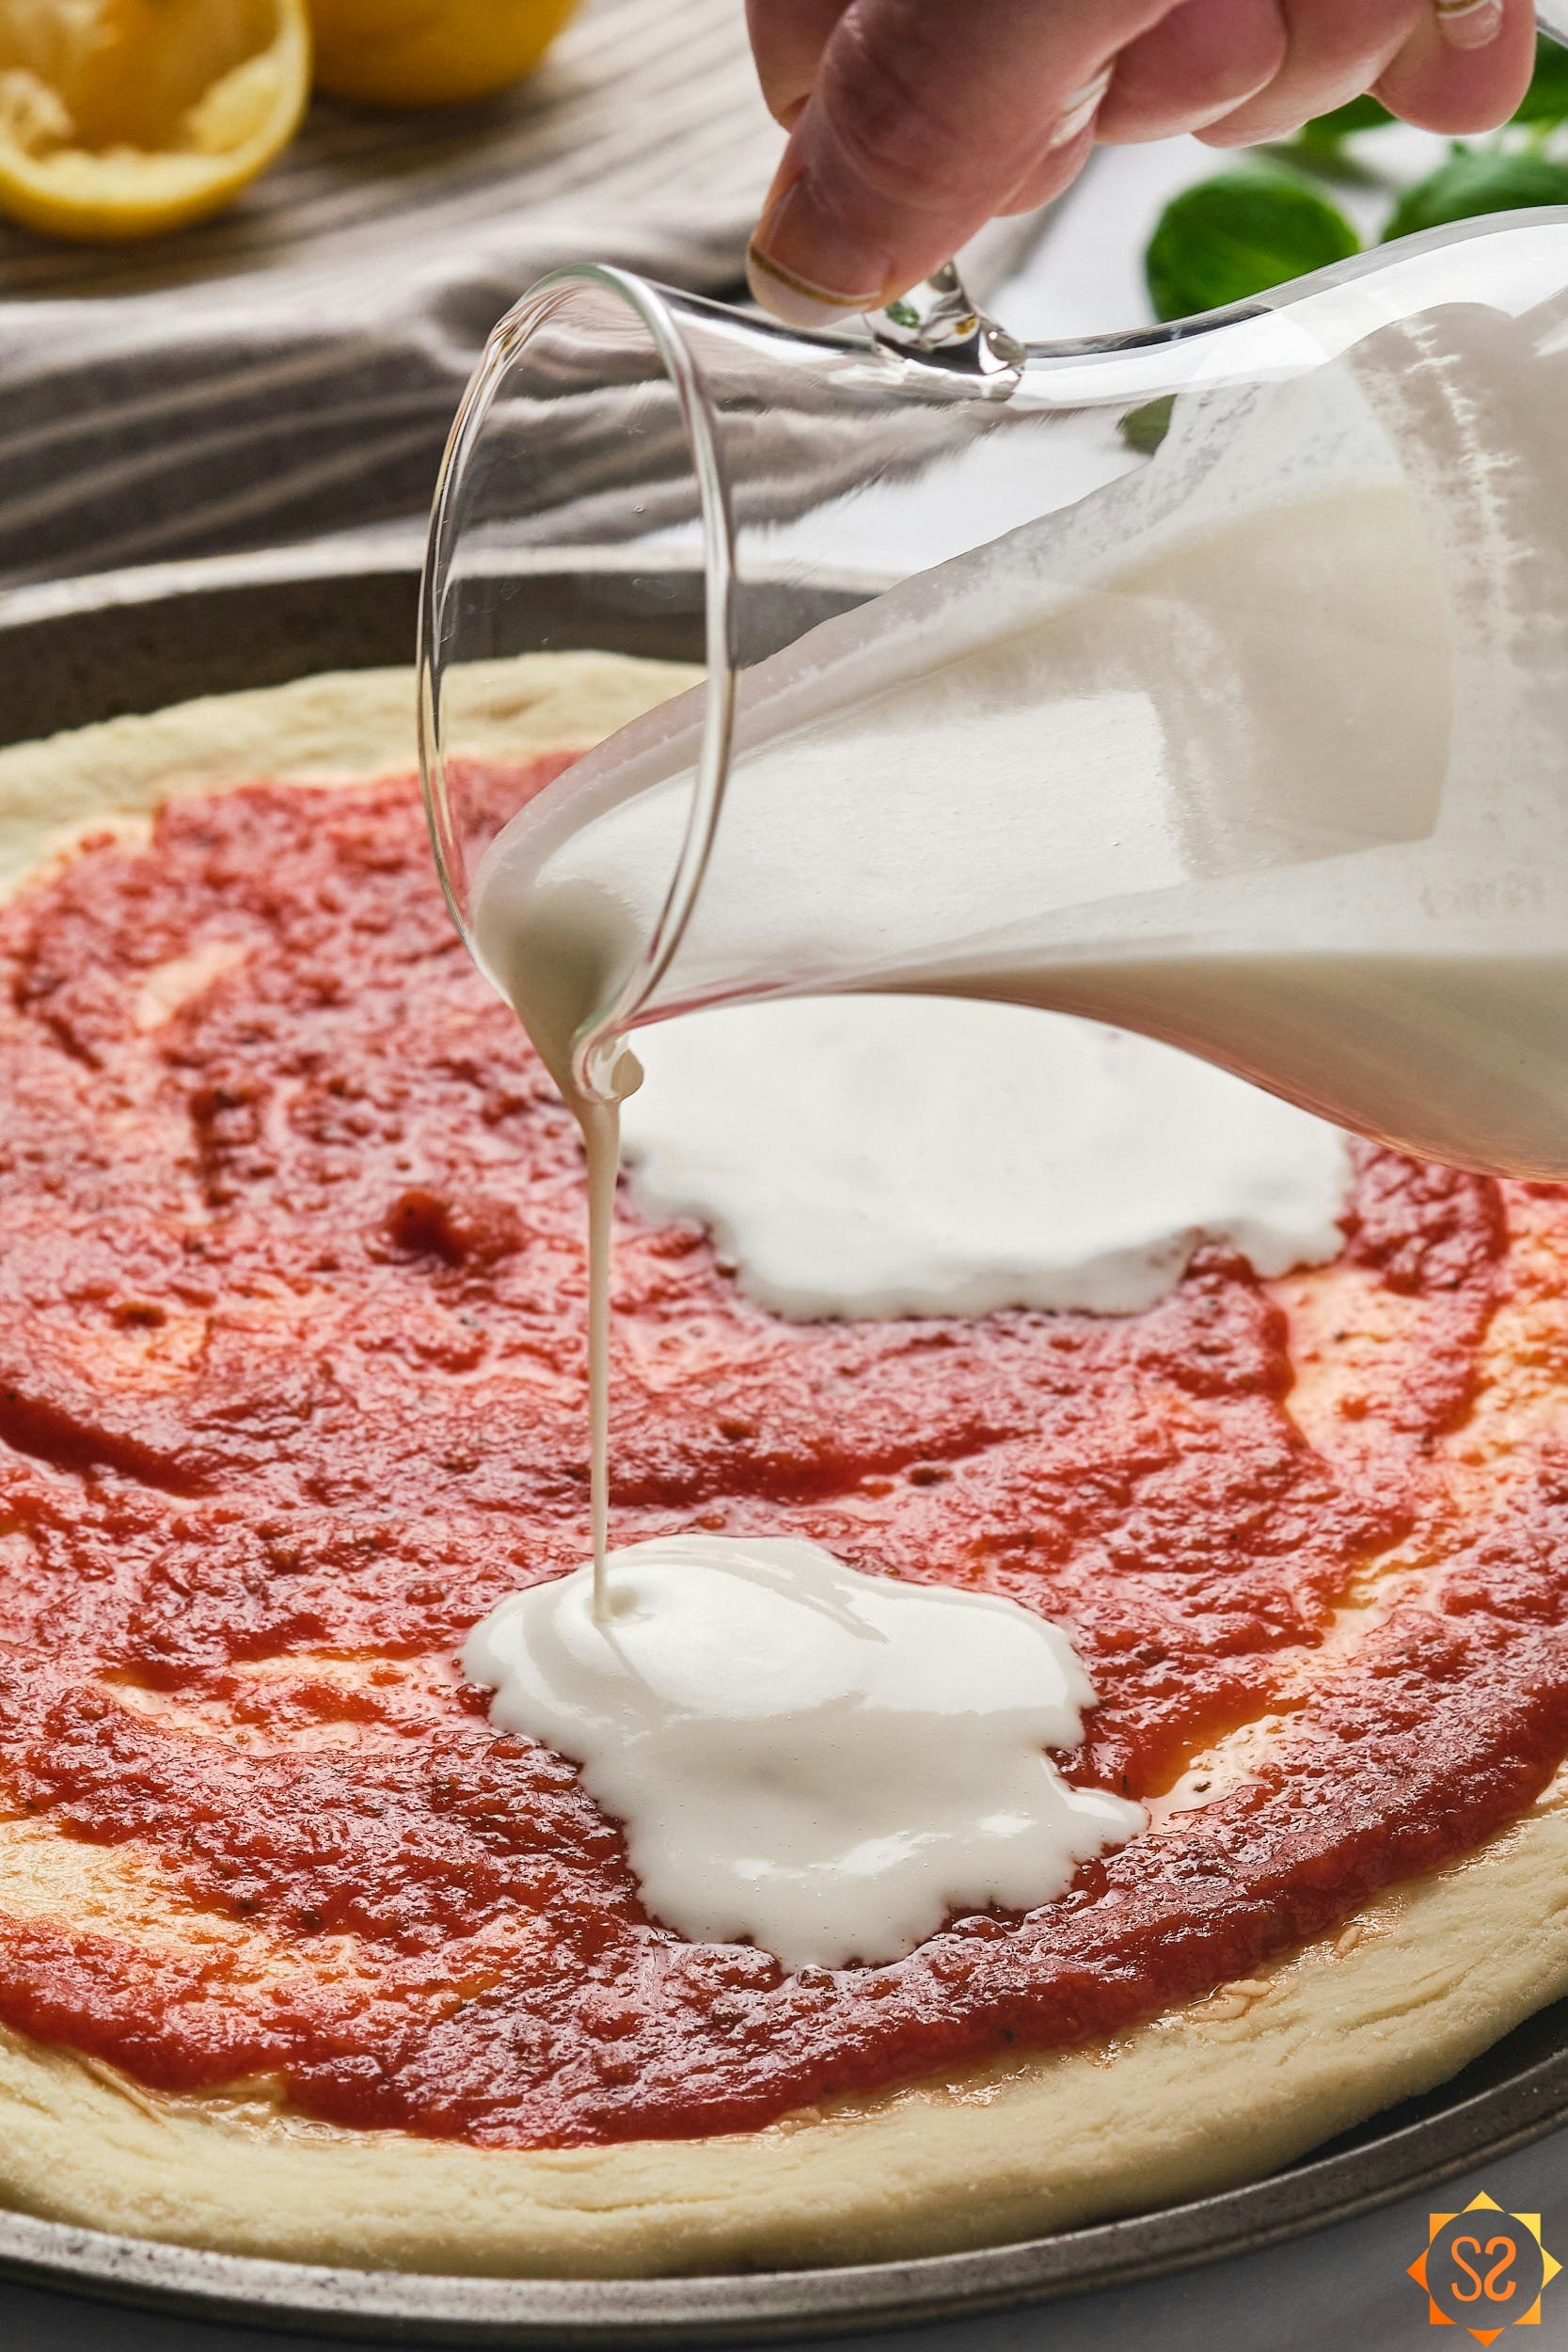 Vegan liquid pizza mozzarella being poured from a pitcher onto an unbaked pizza.